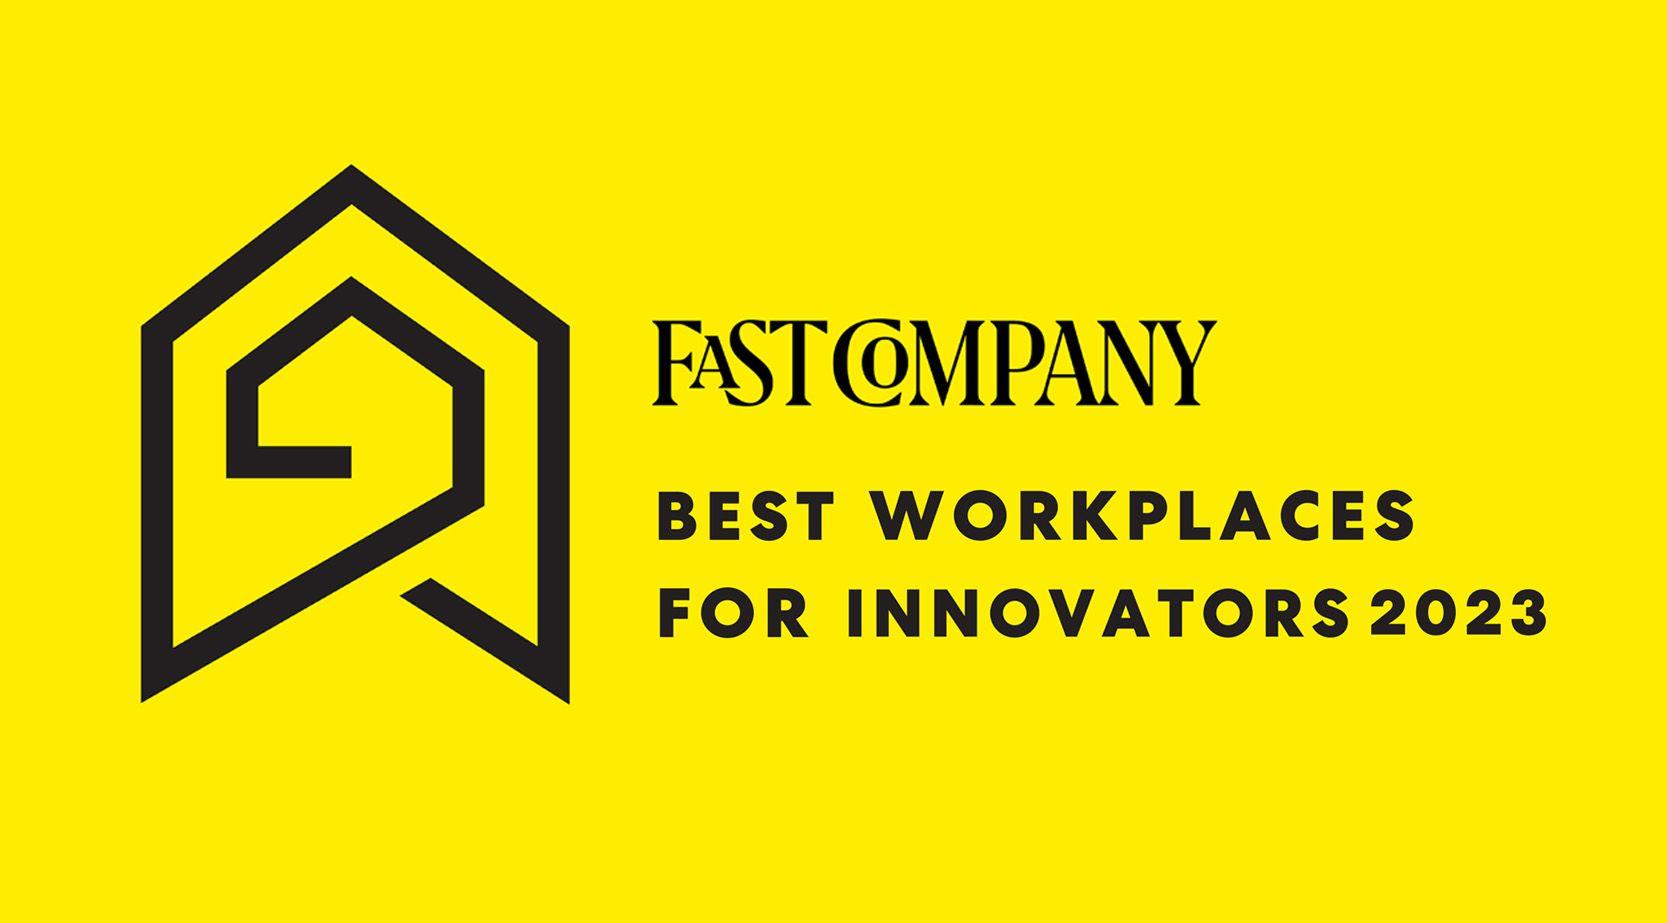 Best Workplaces For Innovators 2023